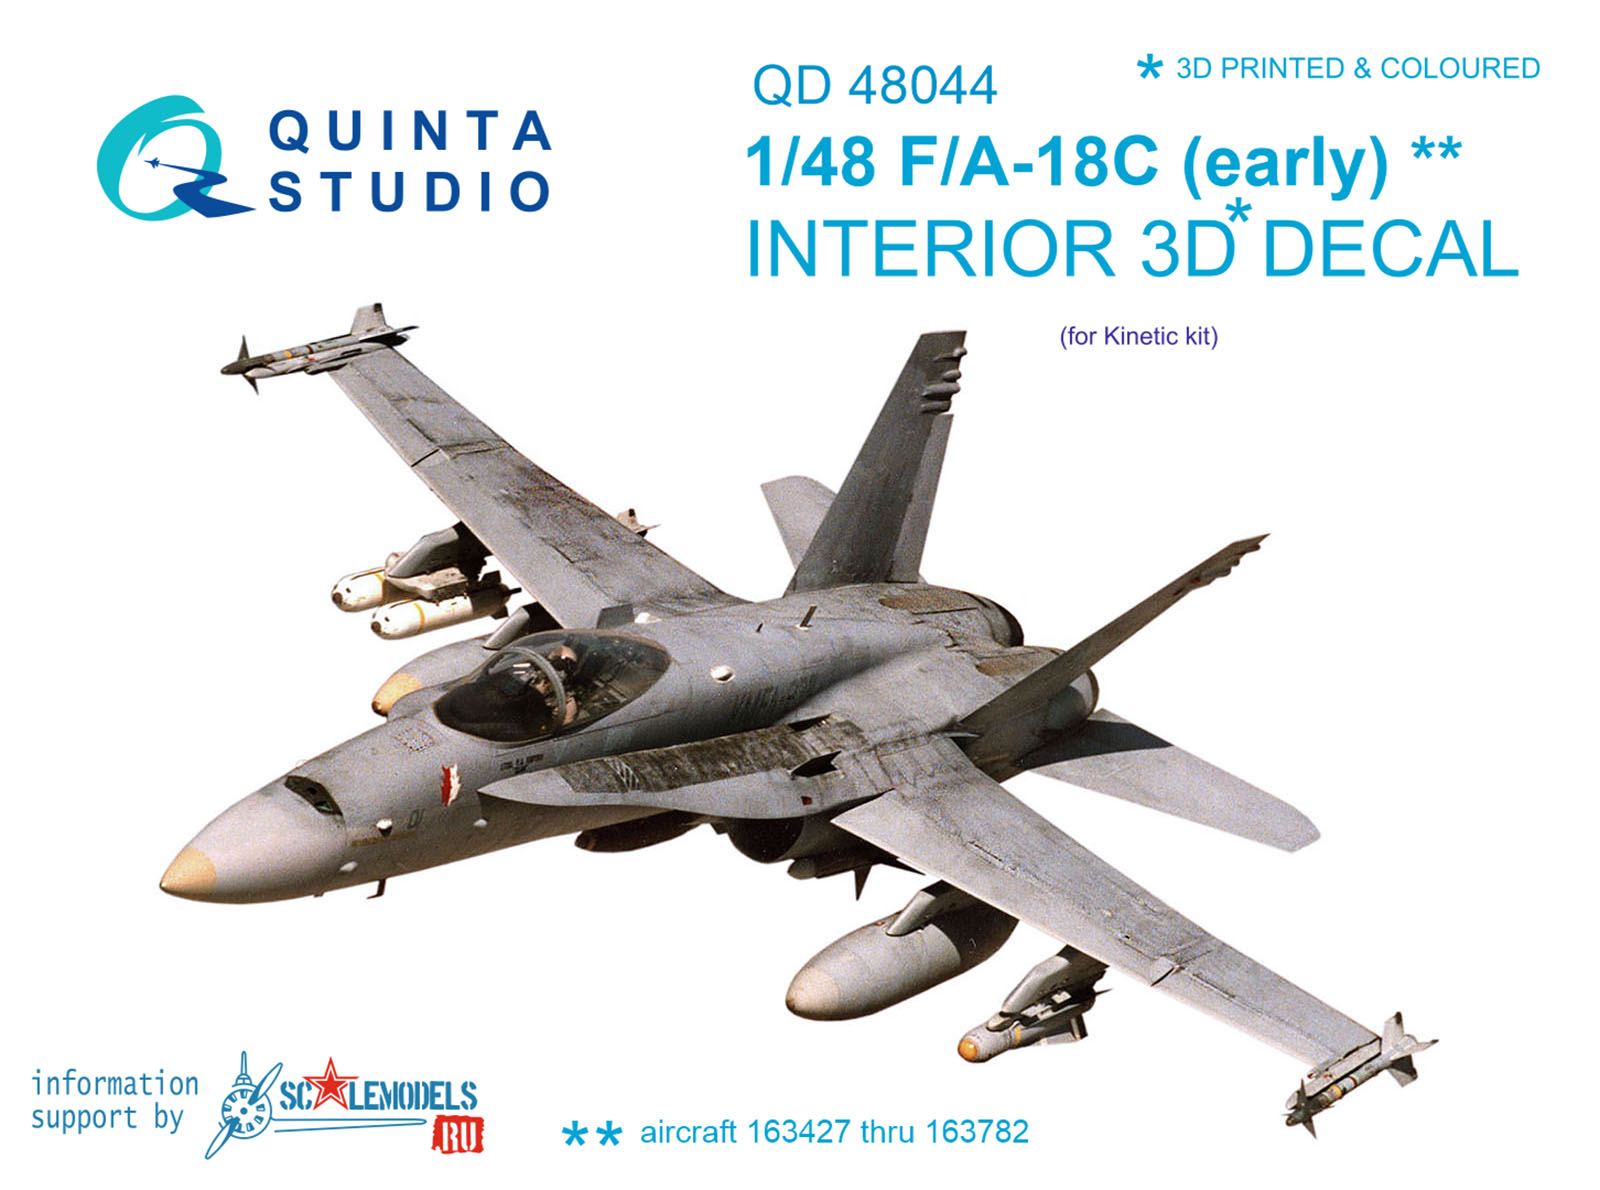 QD48044 – F-18C (early) – 1/48 scale interior 3D decal